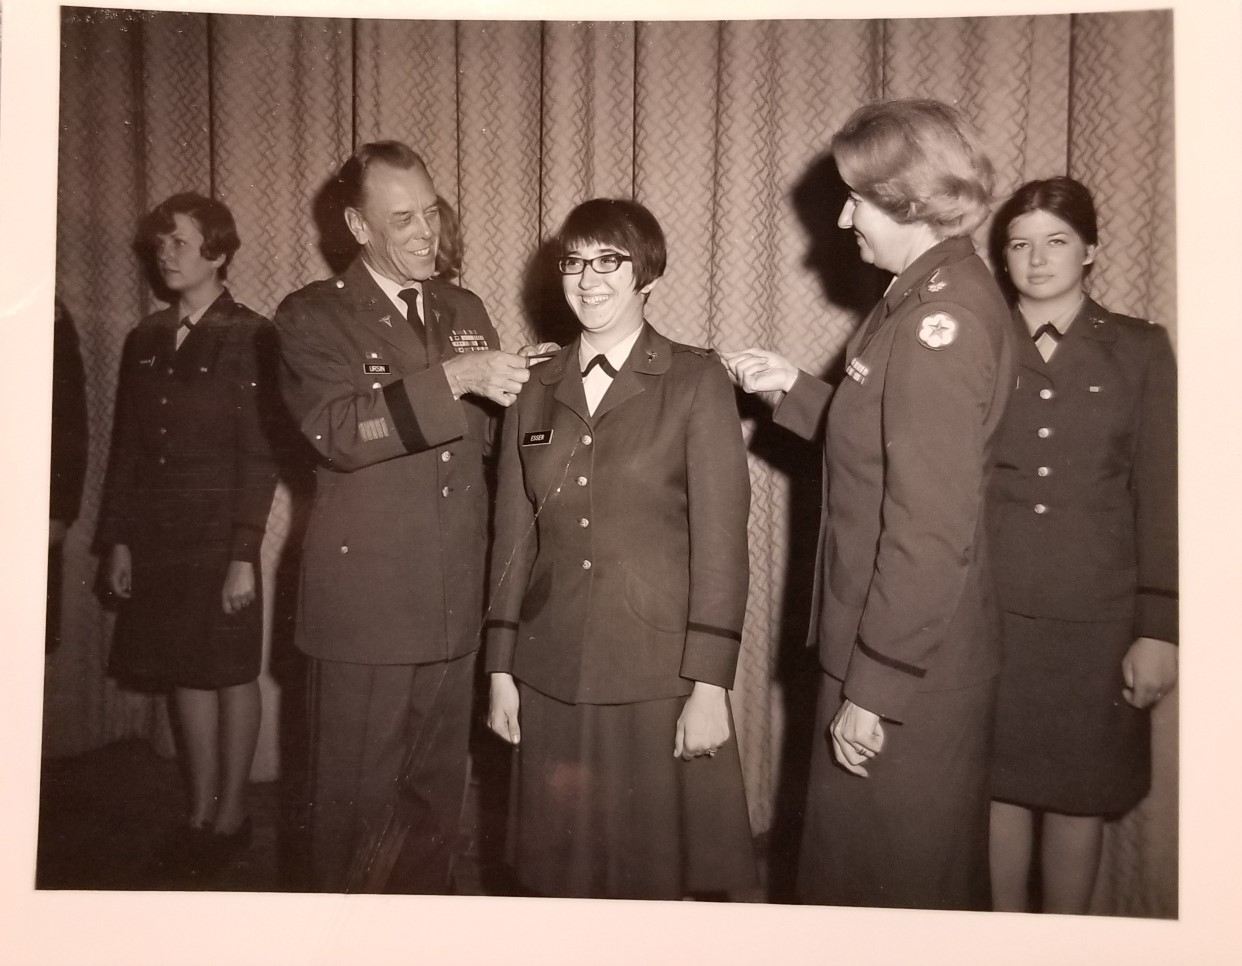 Vintage photo of Mary Jane Esser receiving rank insignia, marking her promotion to first lieutenant in the US Army Nurse Corps.